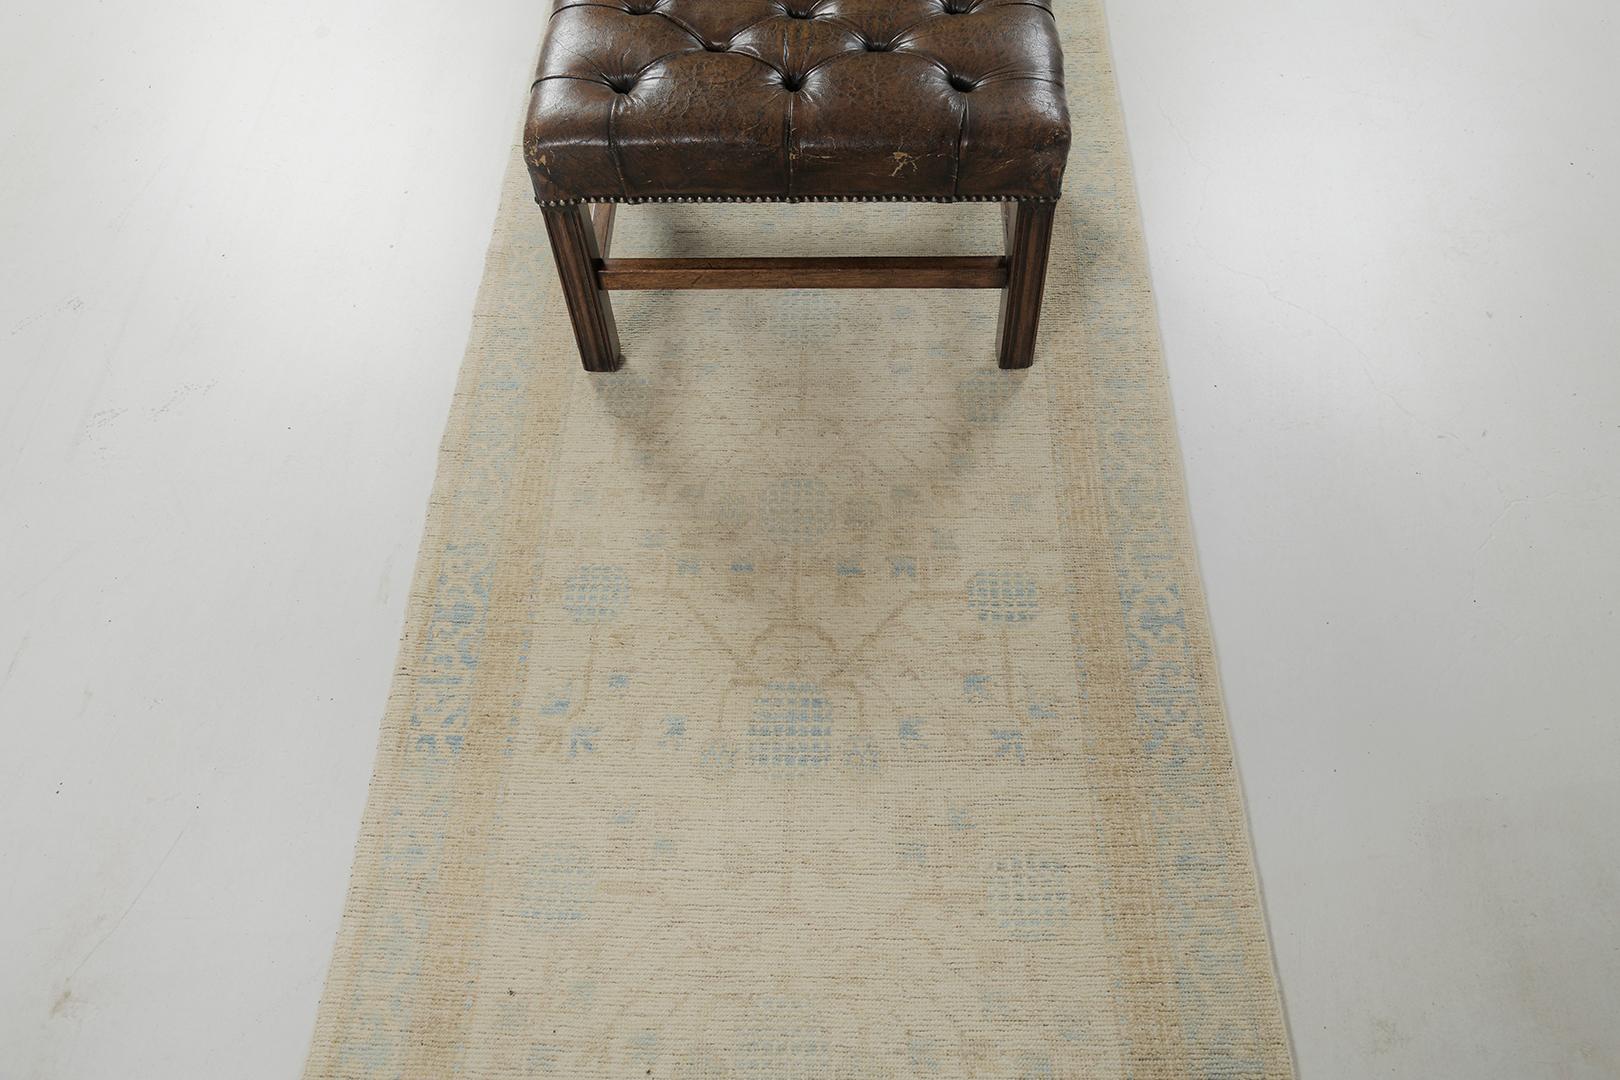 An outstanding pile-woven wool vintage style Khotan design from our Muted Re-Creations collection has come and flexed its versatility. Patterned-positioned pomegranates and ornaments in blue tones dominate the entire pattern of the runner. Stunning